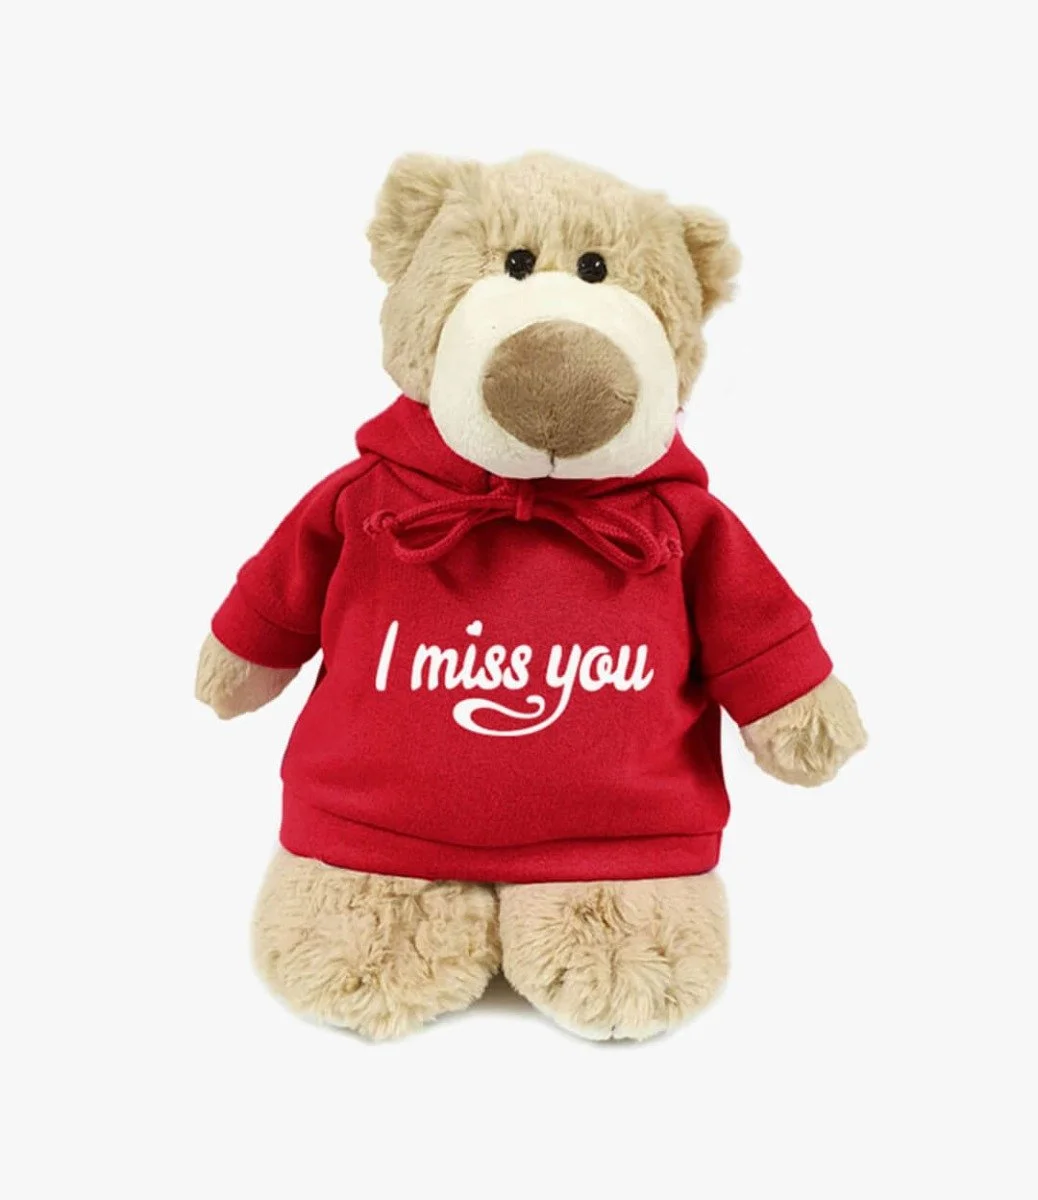 Mascot Bear in Red Hoodie "I Miss You" by Fay Lawson